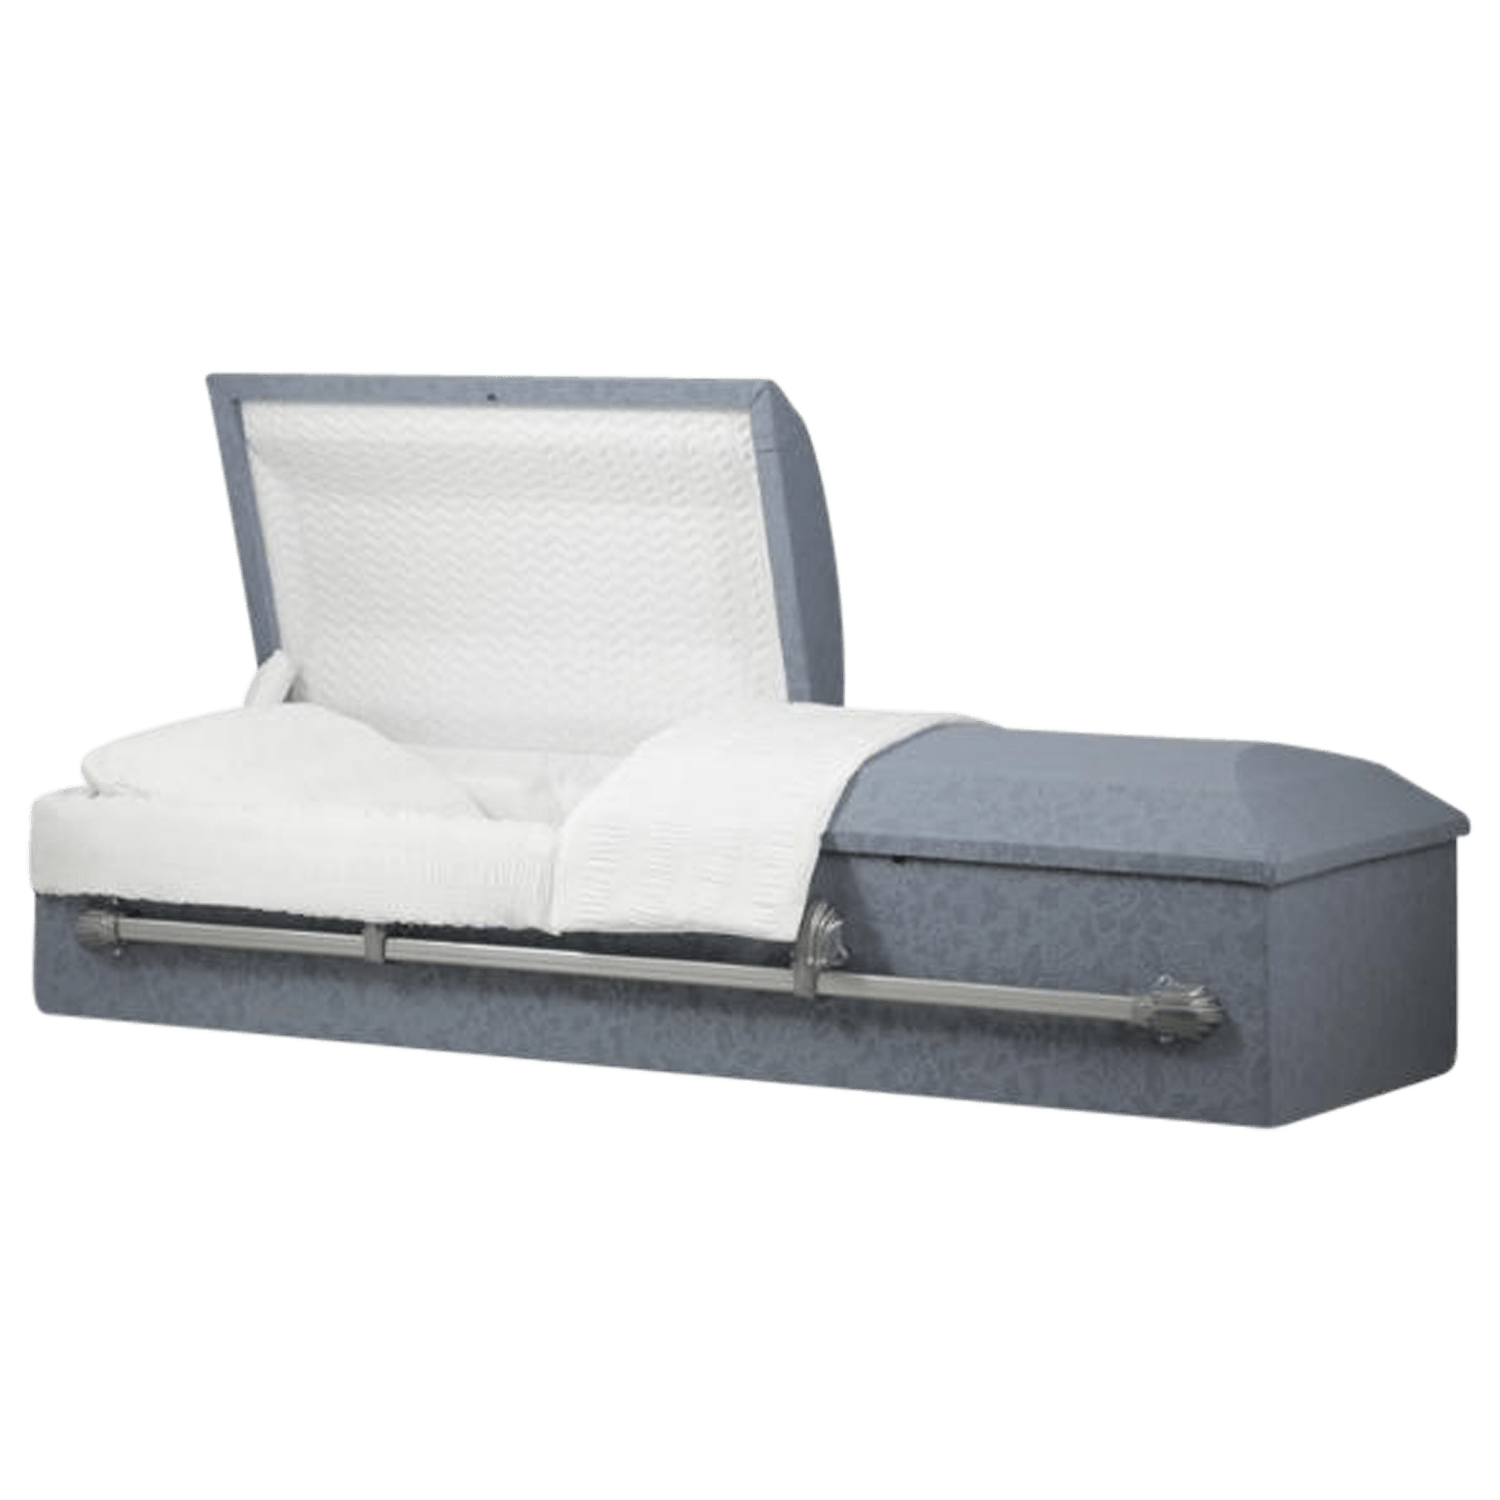 Rounded-Top Cloth | Cloth-Covered Casket - Titan Casket